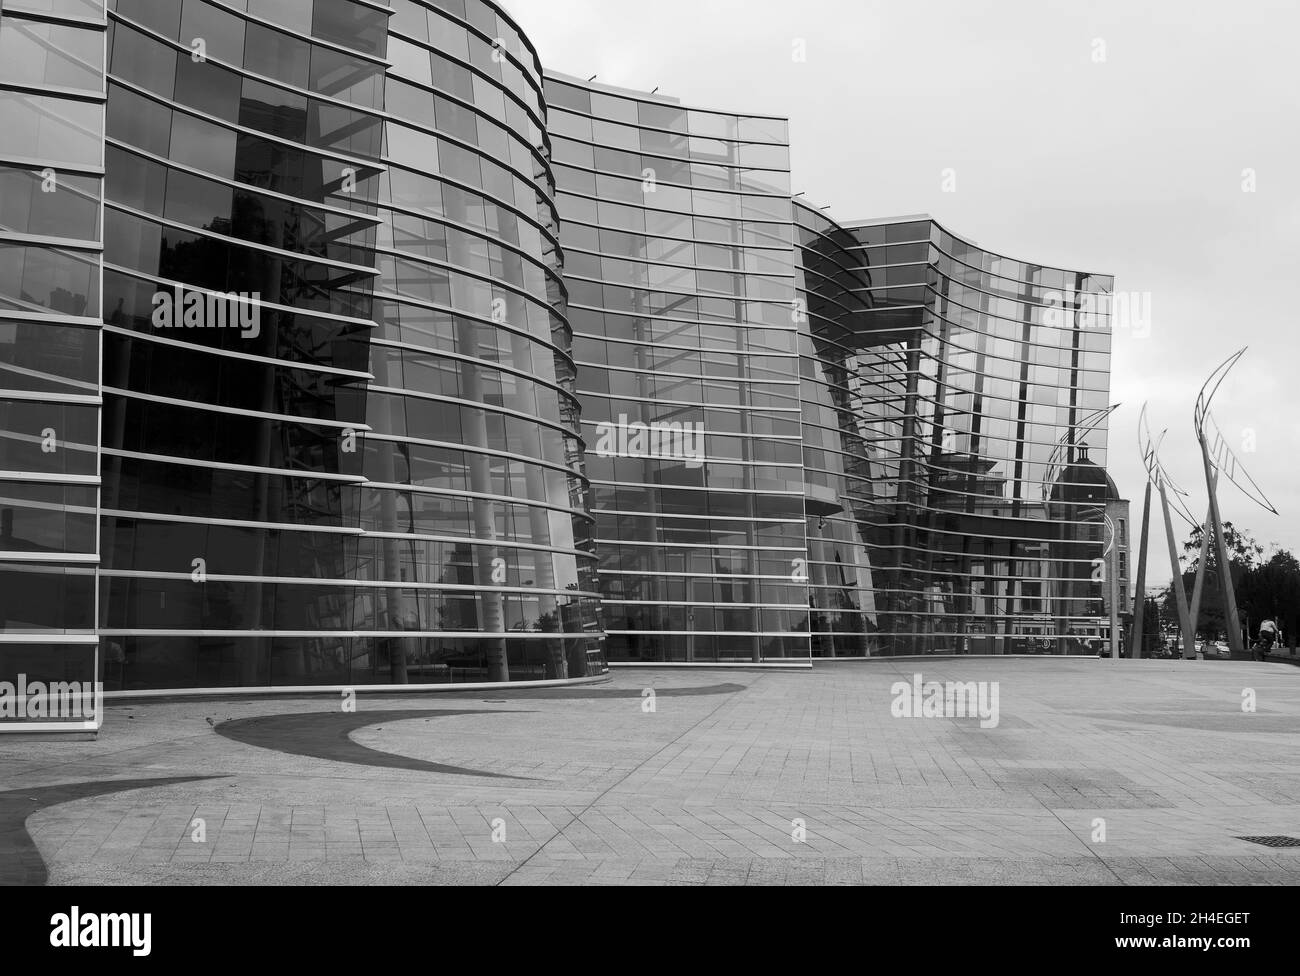 Christchurch Art Gallery; tall wavy glass facade; curved, modern architecture; contemporary, 2003, reflections, Reasons for Voyaging sculpture, black Stock Photo